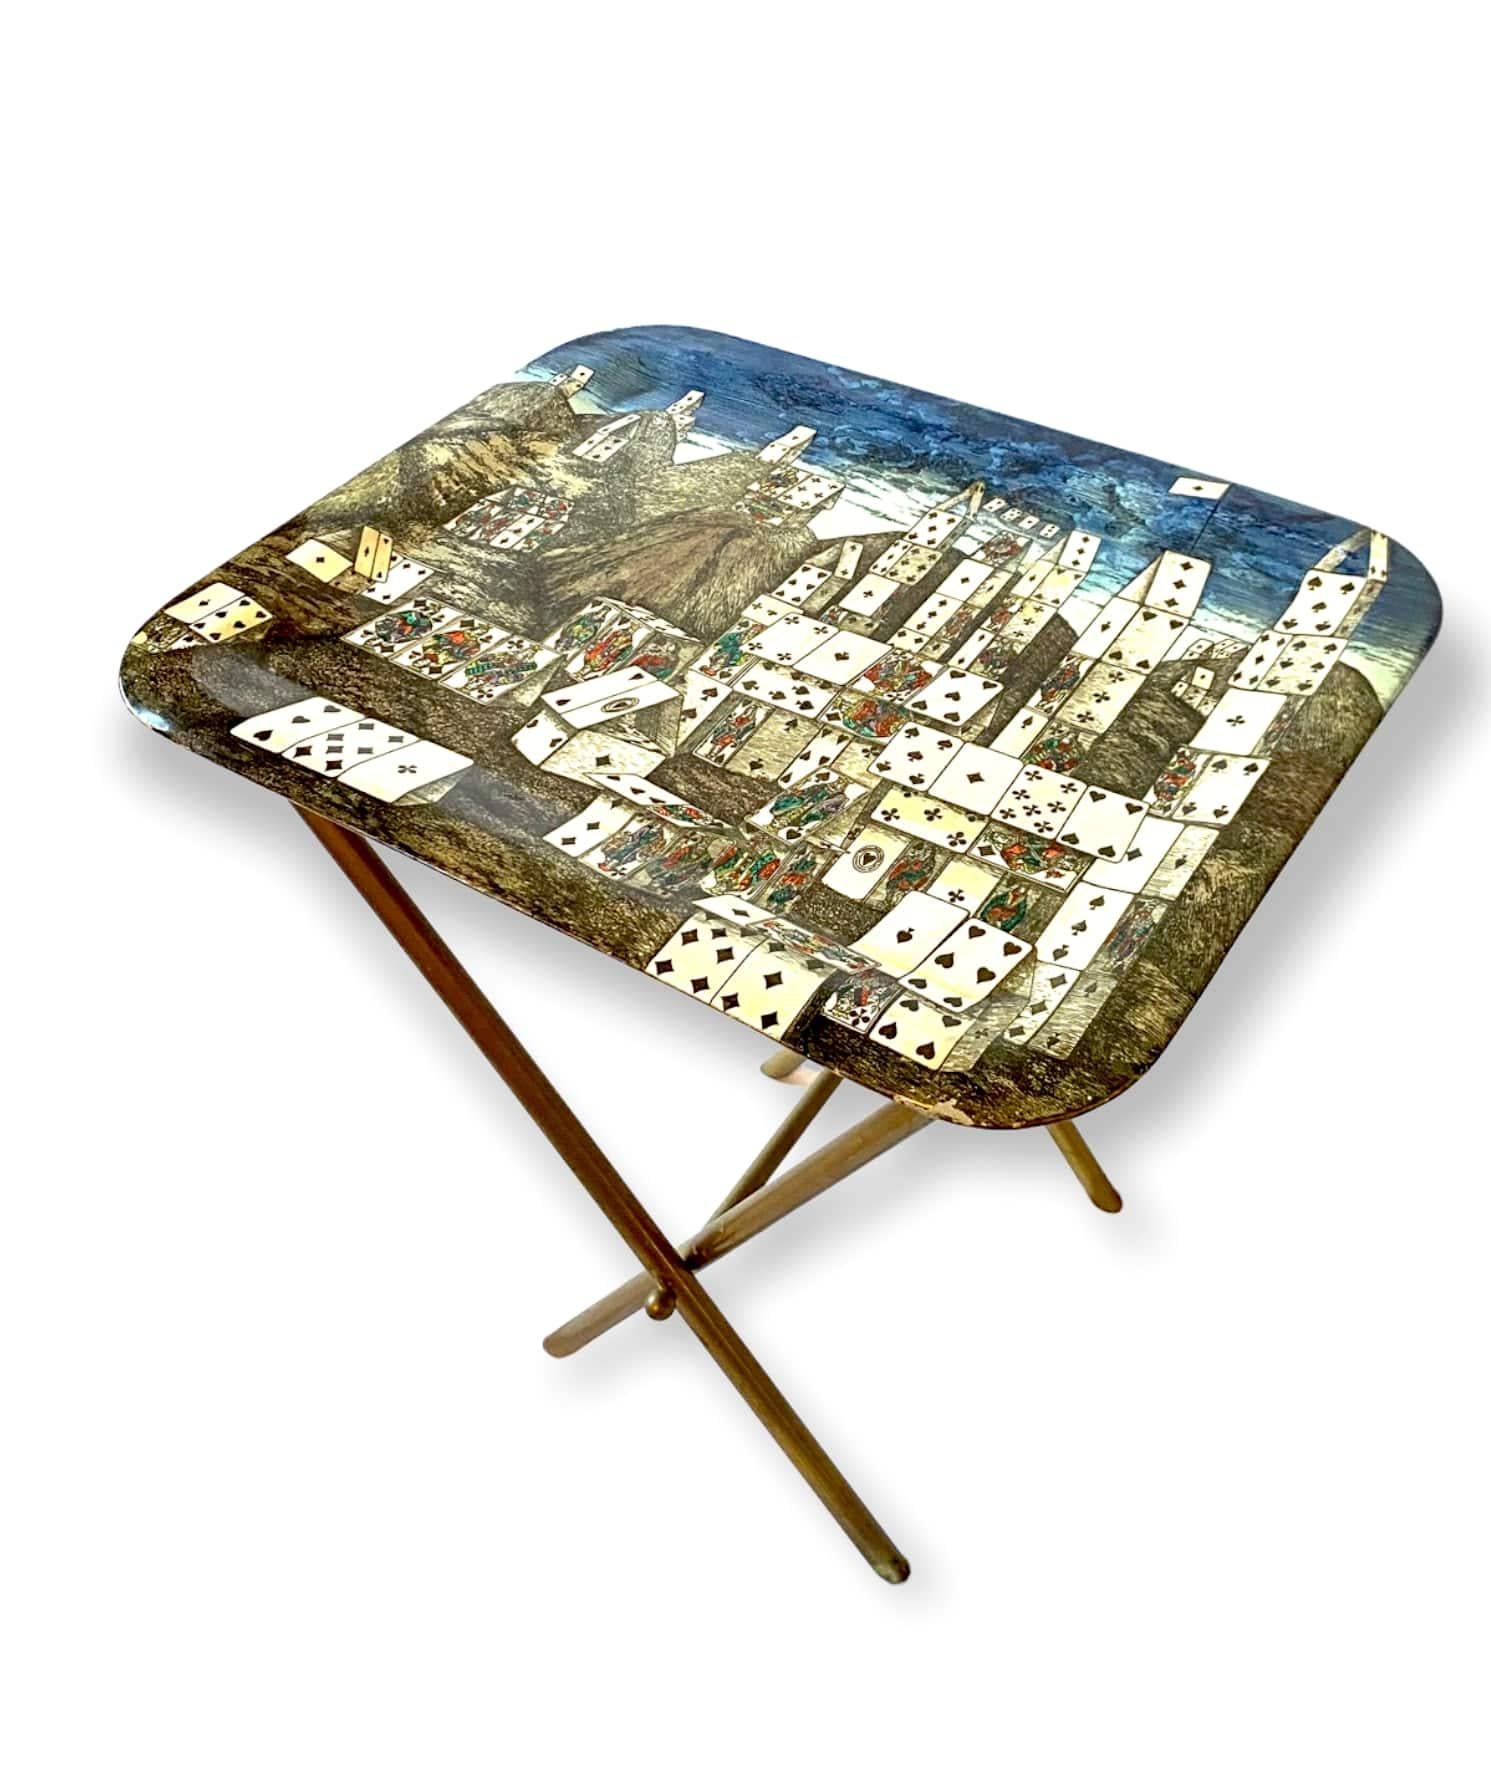 Midcentury folding coffee table.

Fantasia “Città delle Carte” (City of Cards). The rarest and most fascinating Fornasetti’s pattern.

Piero Fornasetti, Italy, 1950s

French label under the tray (1955 - 1965)

Brass, fabric,